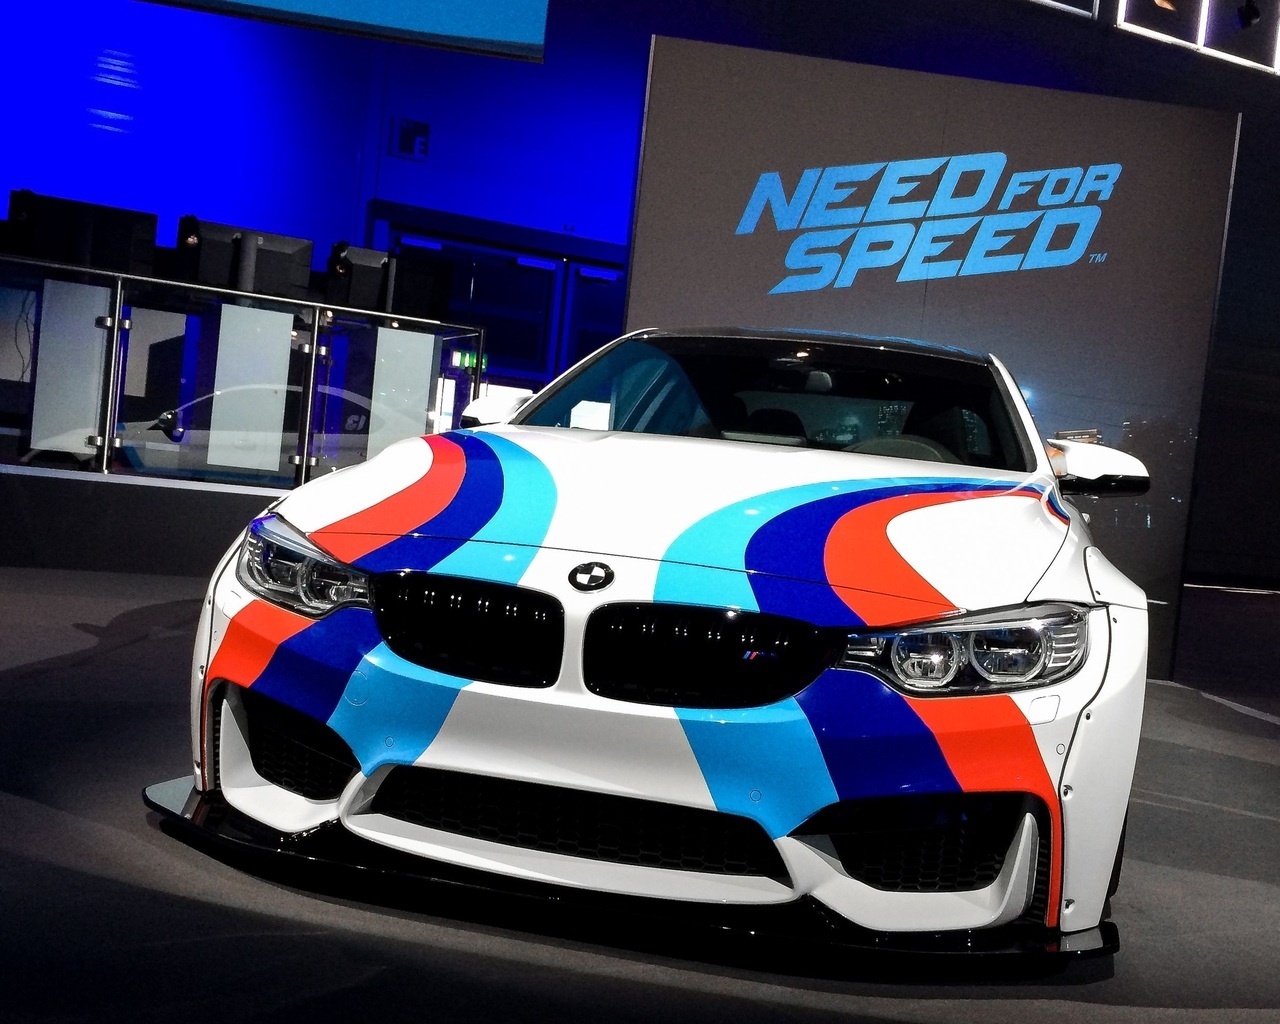 Need For Speed BMW for 1280 x 1024 resolution